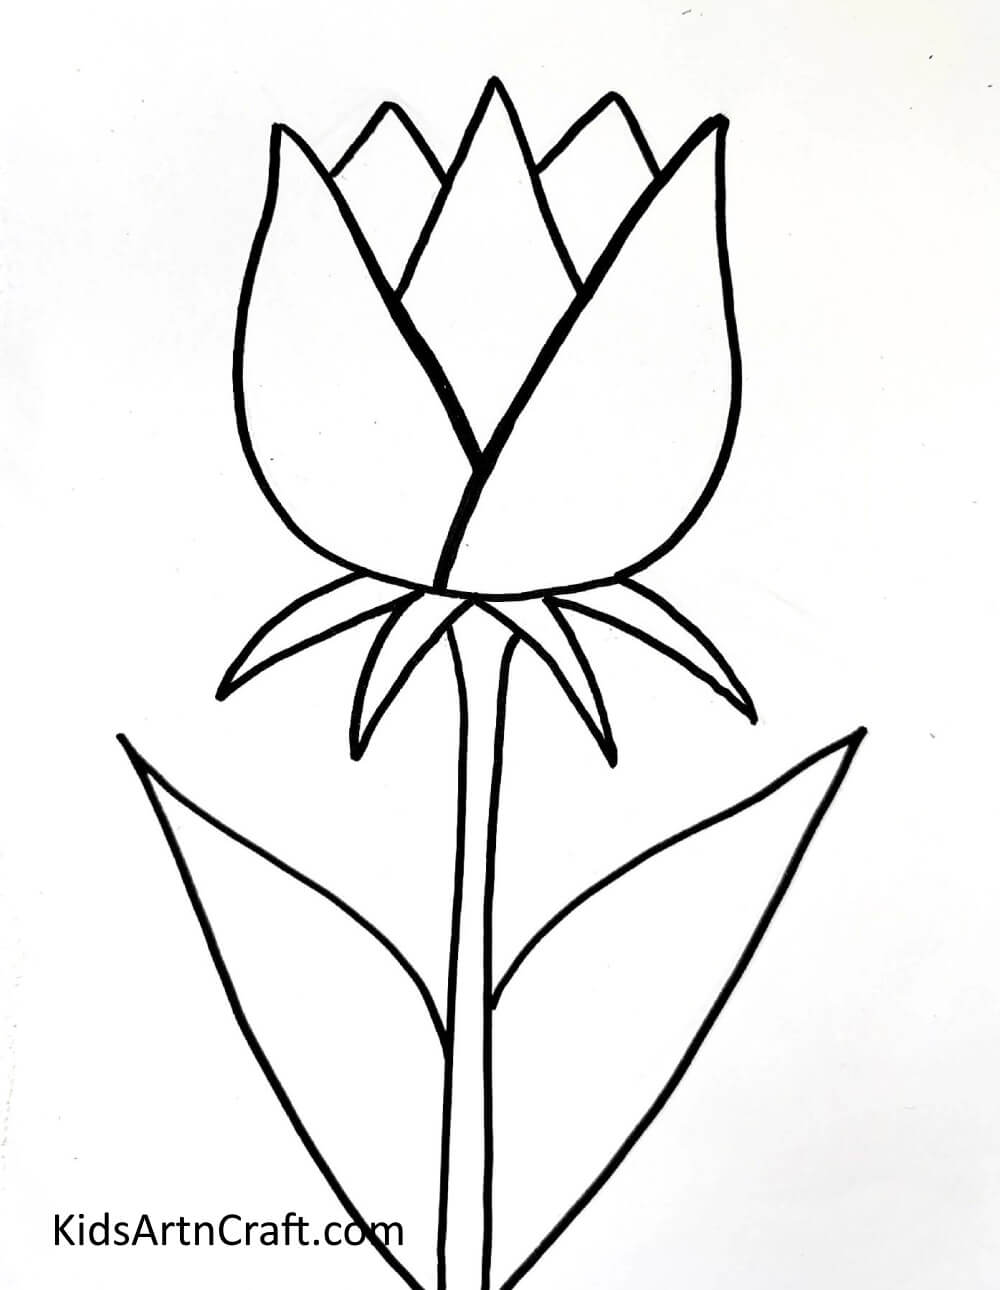 Adding Sepals And Leaves - Helping kids comprehend the straightforward process of painting a Tulip. 